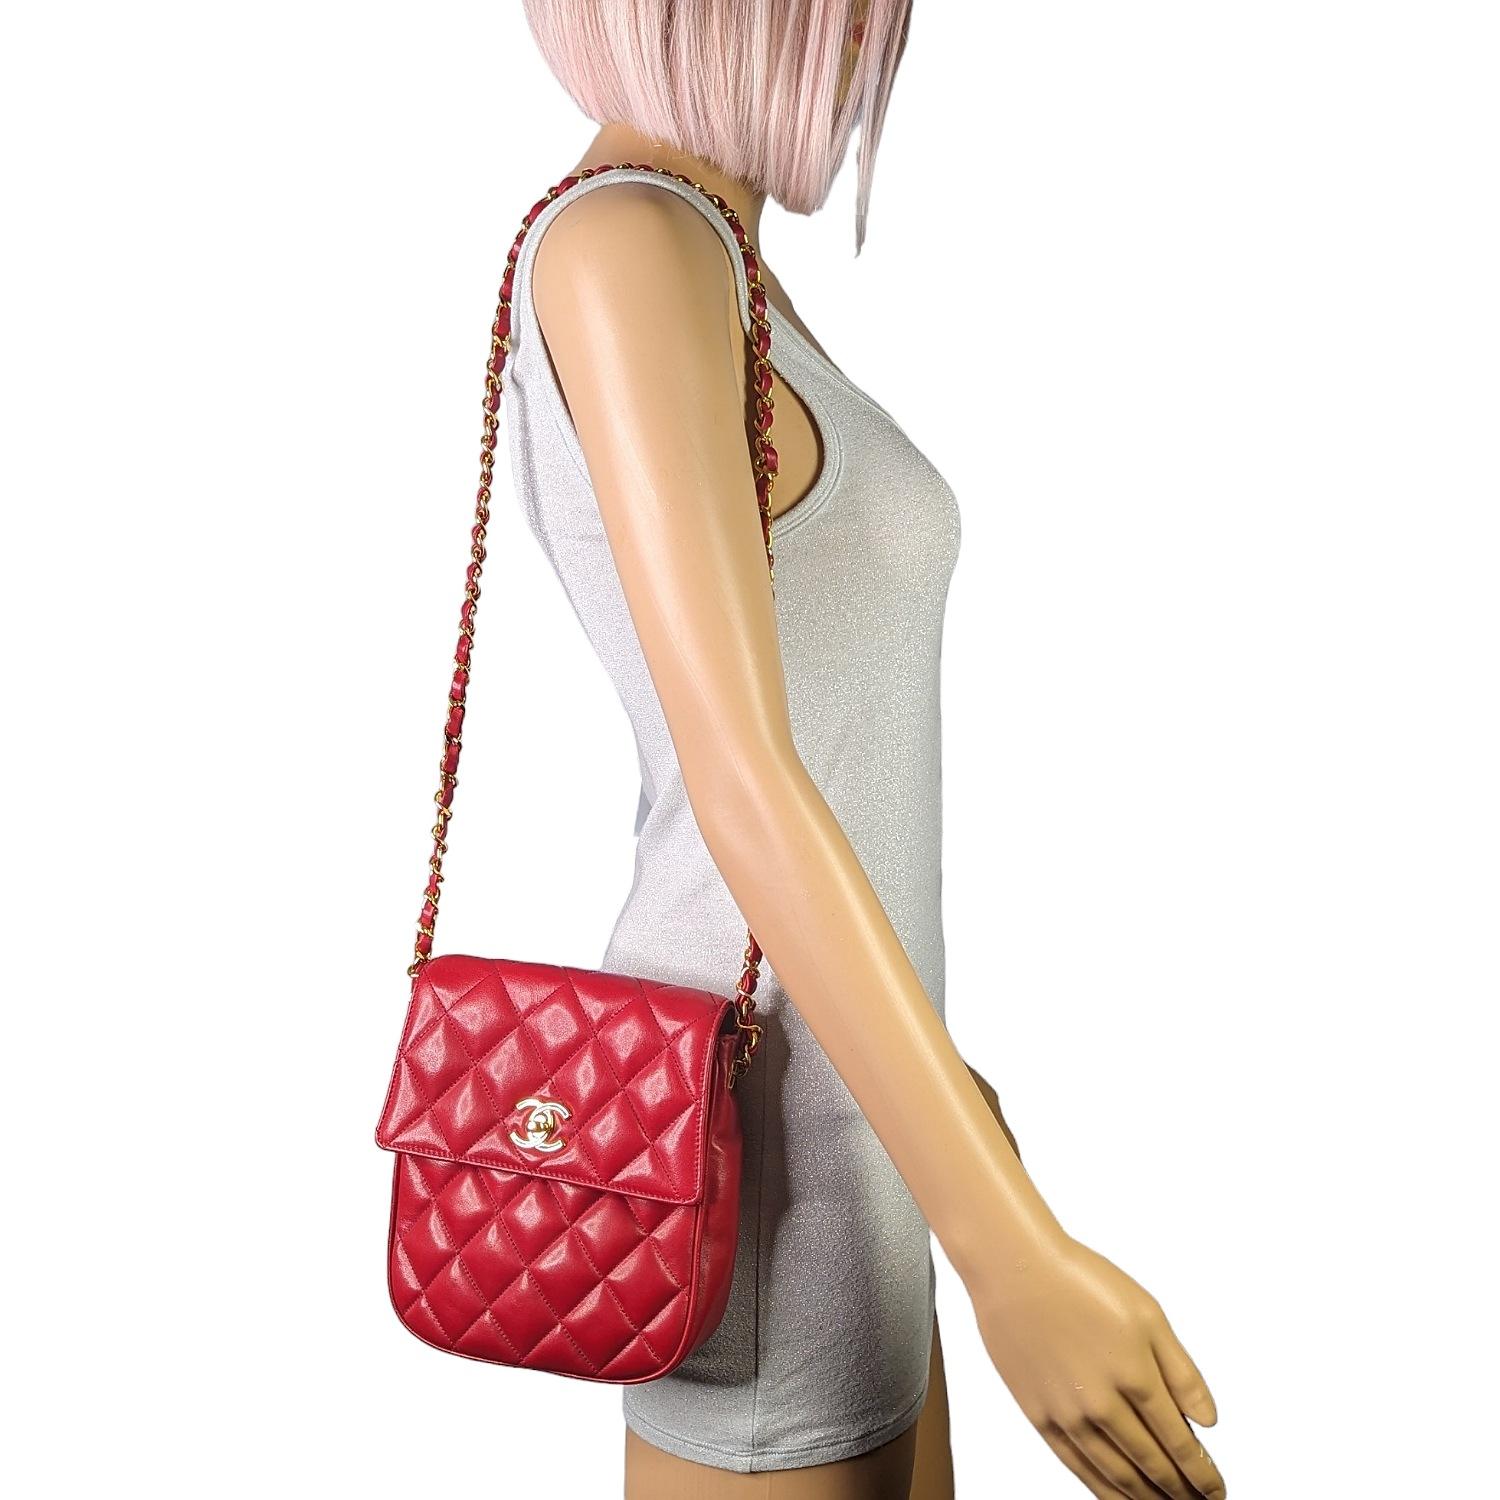 This chic shoulder bag is finely composed of luxuriously supple diamond quilted lambskin leather in red. The bag features a gold chain link leather threaded strap and a gold Chanel CC turn lock. This opens the front flap to a black leather interior